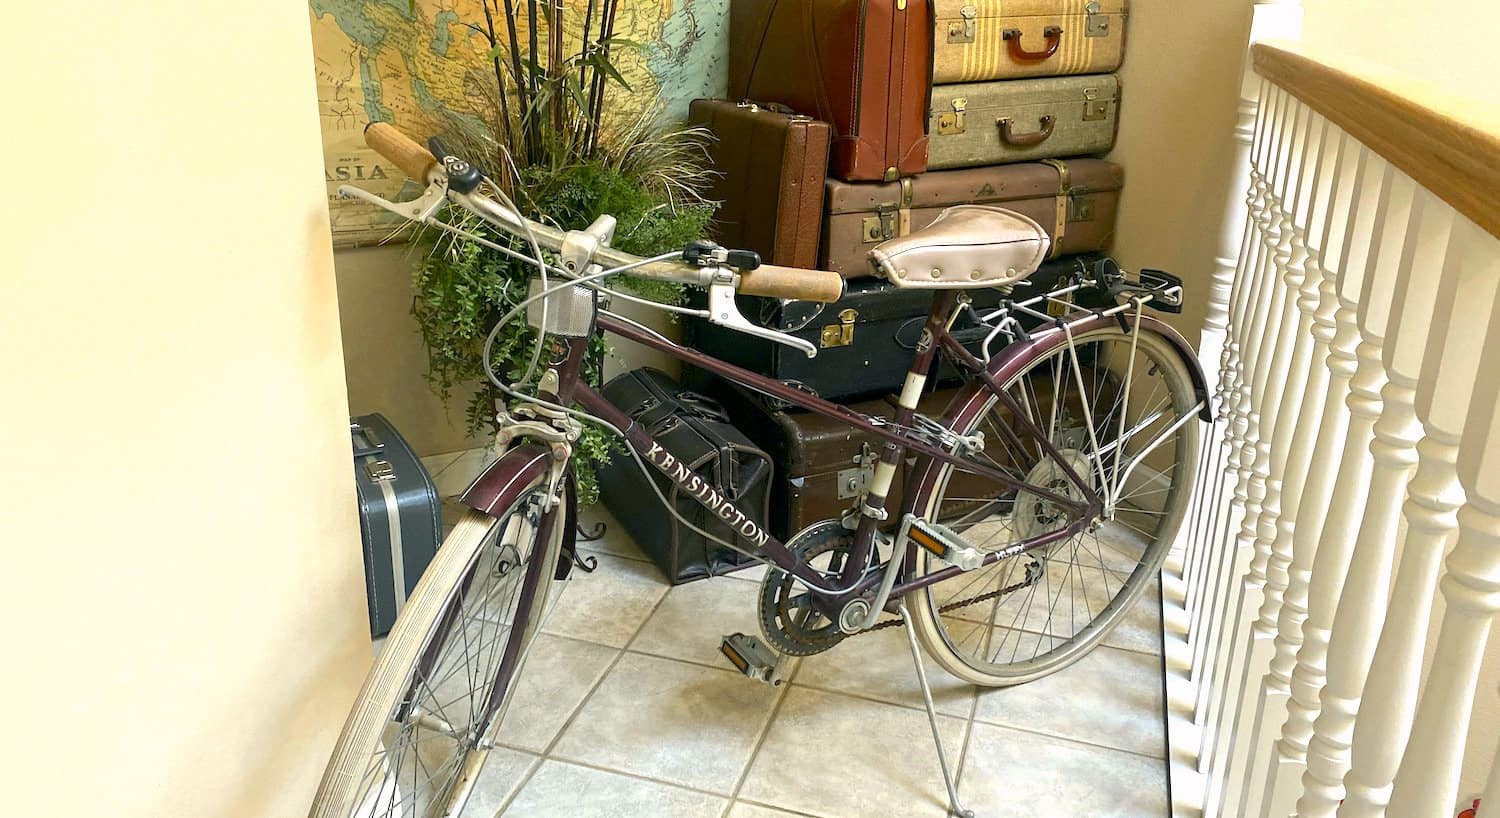 Close up view of antique bicycle in front of multiple antique suitcases